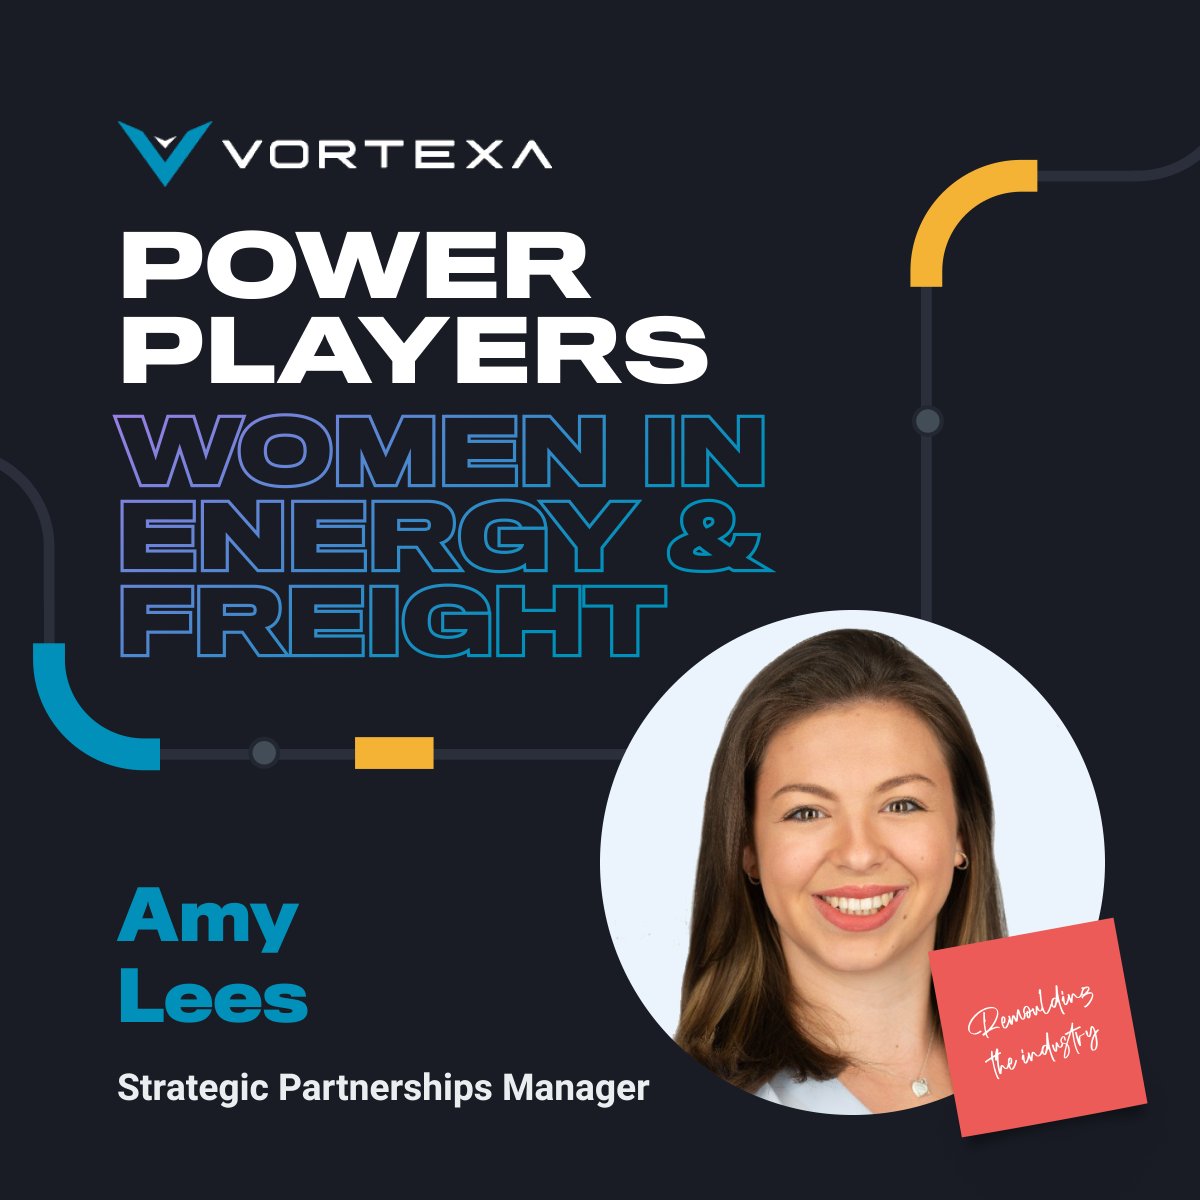 “Global collaboration is vital for addressing the Energy Trilemma, managing affordability, security, and sustainability.” We asked Strategic Partnerships Manager Amy Lees about the importance of global collaboration in balancing the Energy Trilemma: bit.ly/3TfjJfL